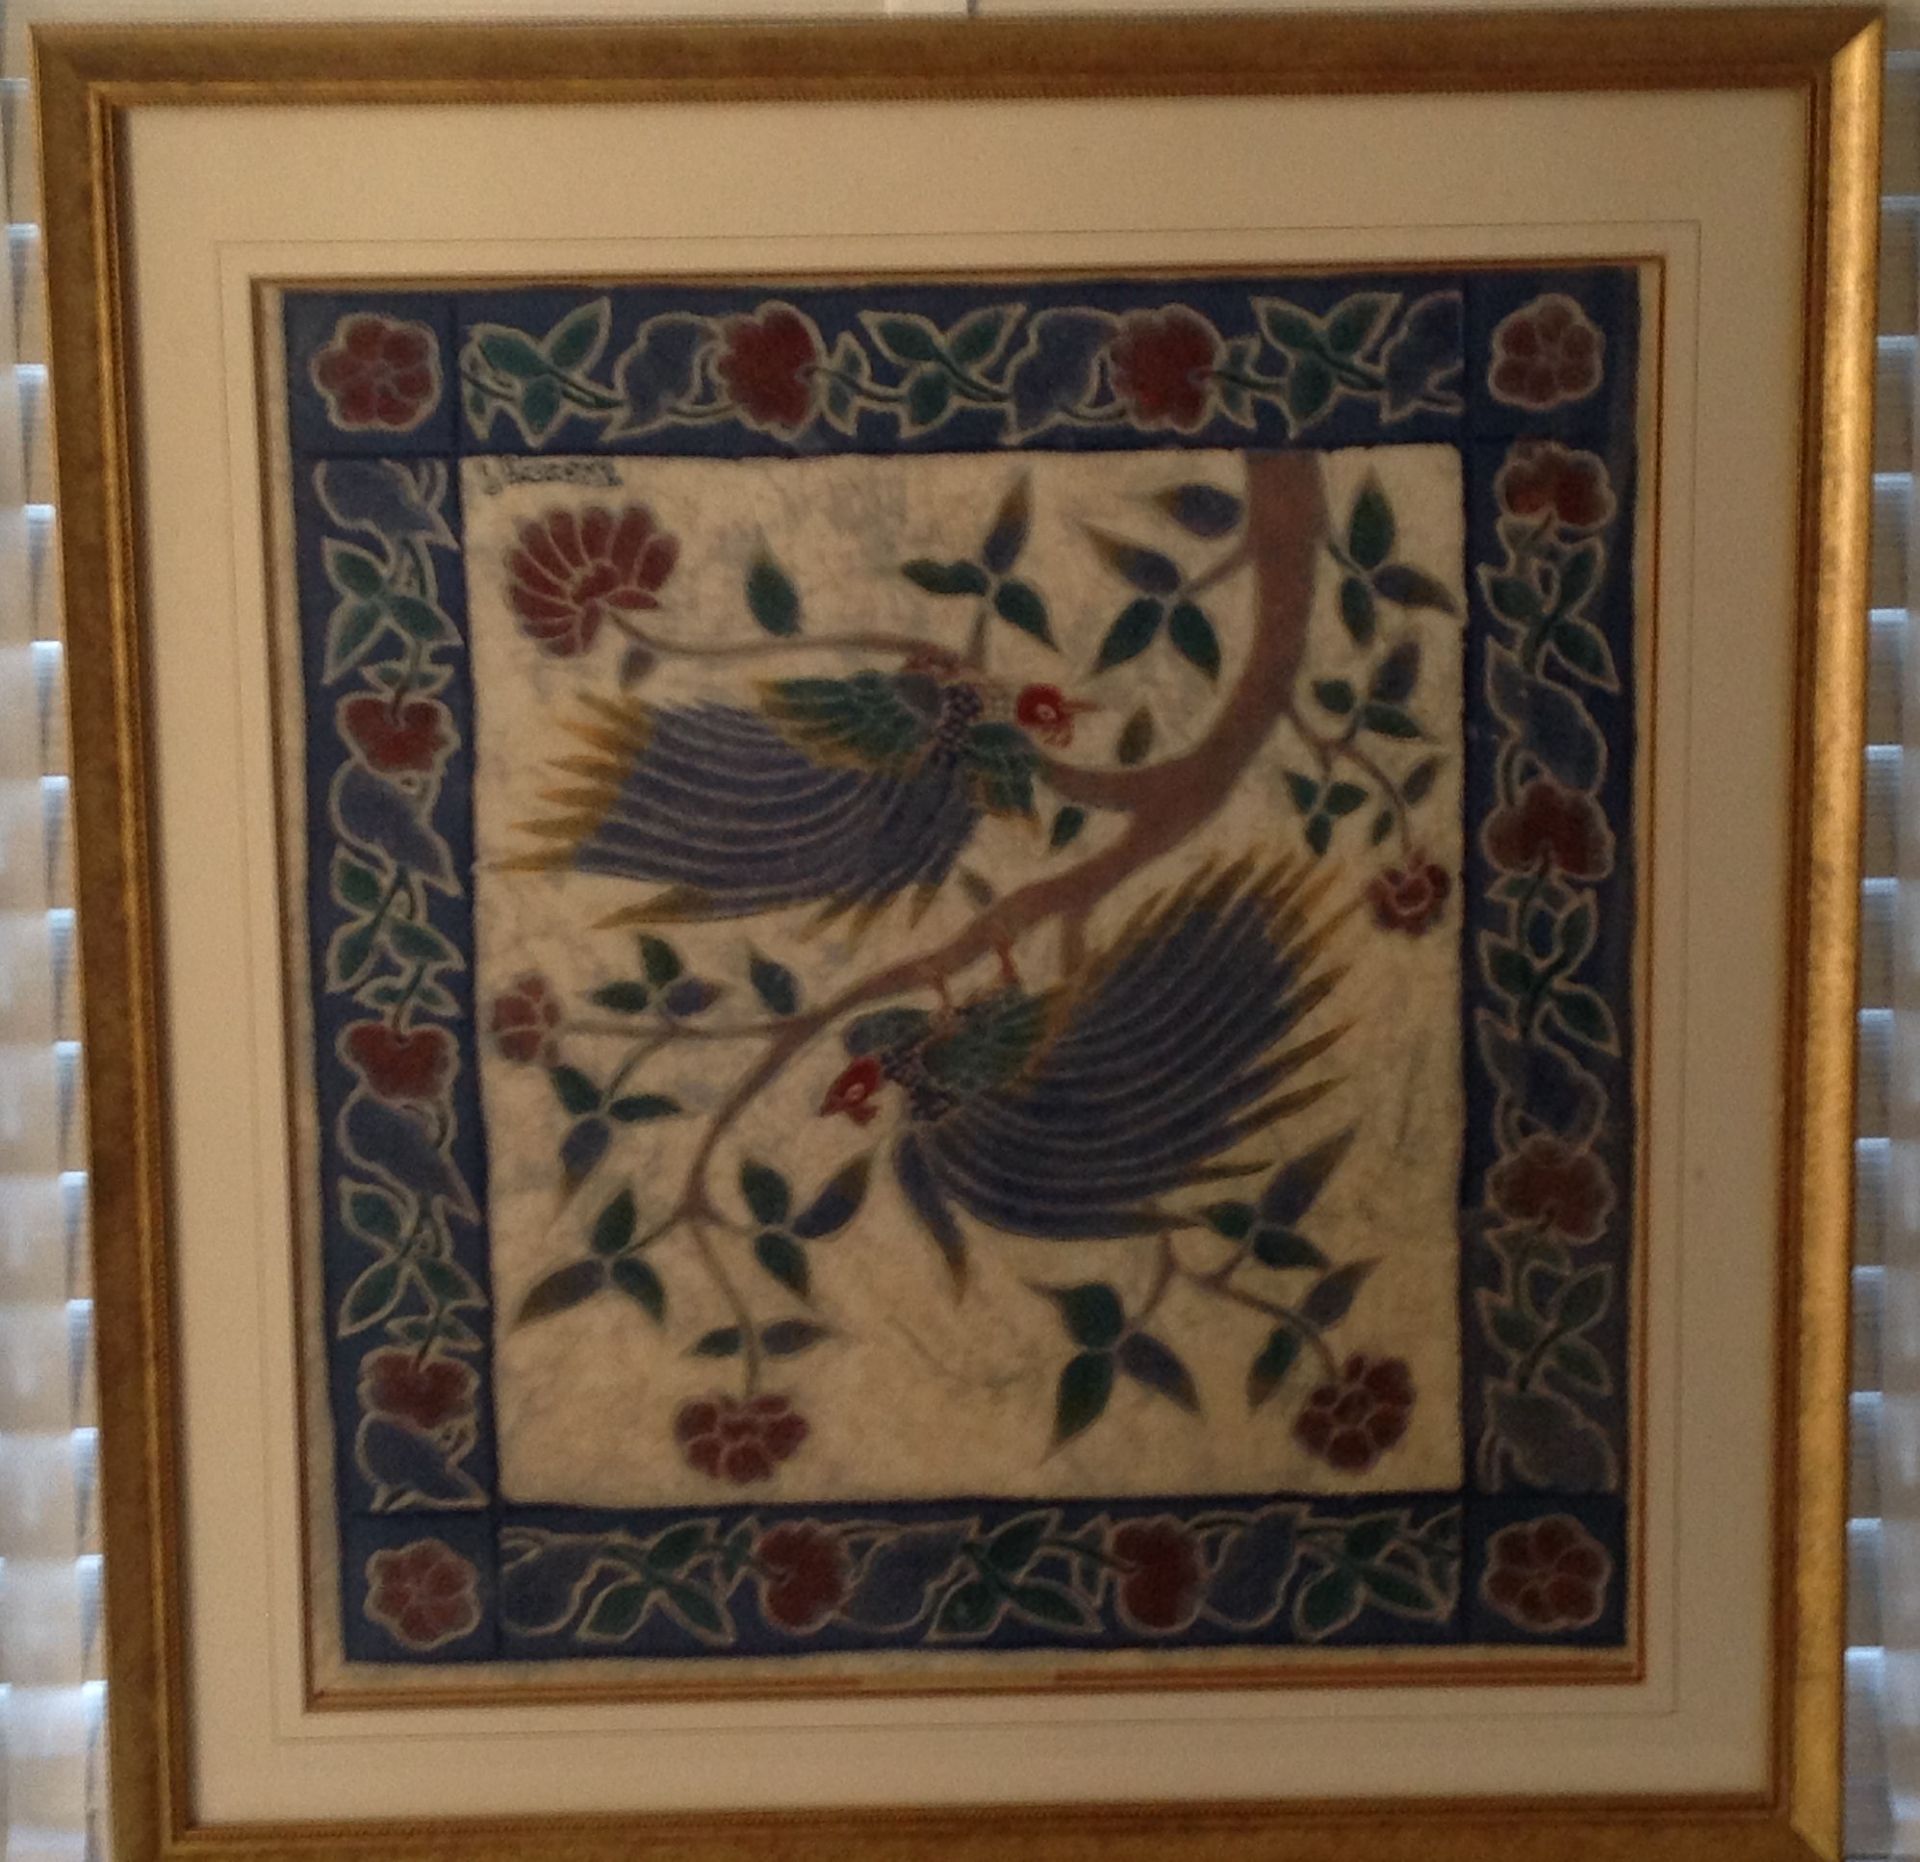 1 x Attractive Framed Bali Fabric Print Featuring Two Blue Exotic Birds - 57cm x 60cm (Framed) - - Image 2 of 2